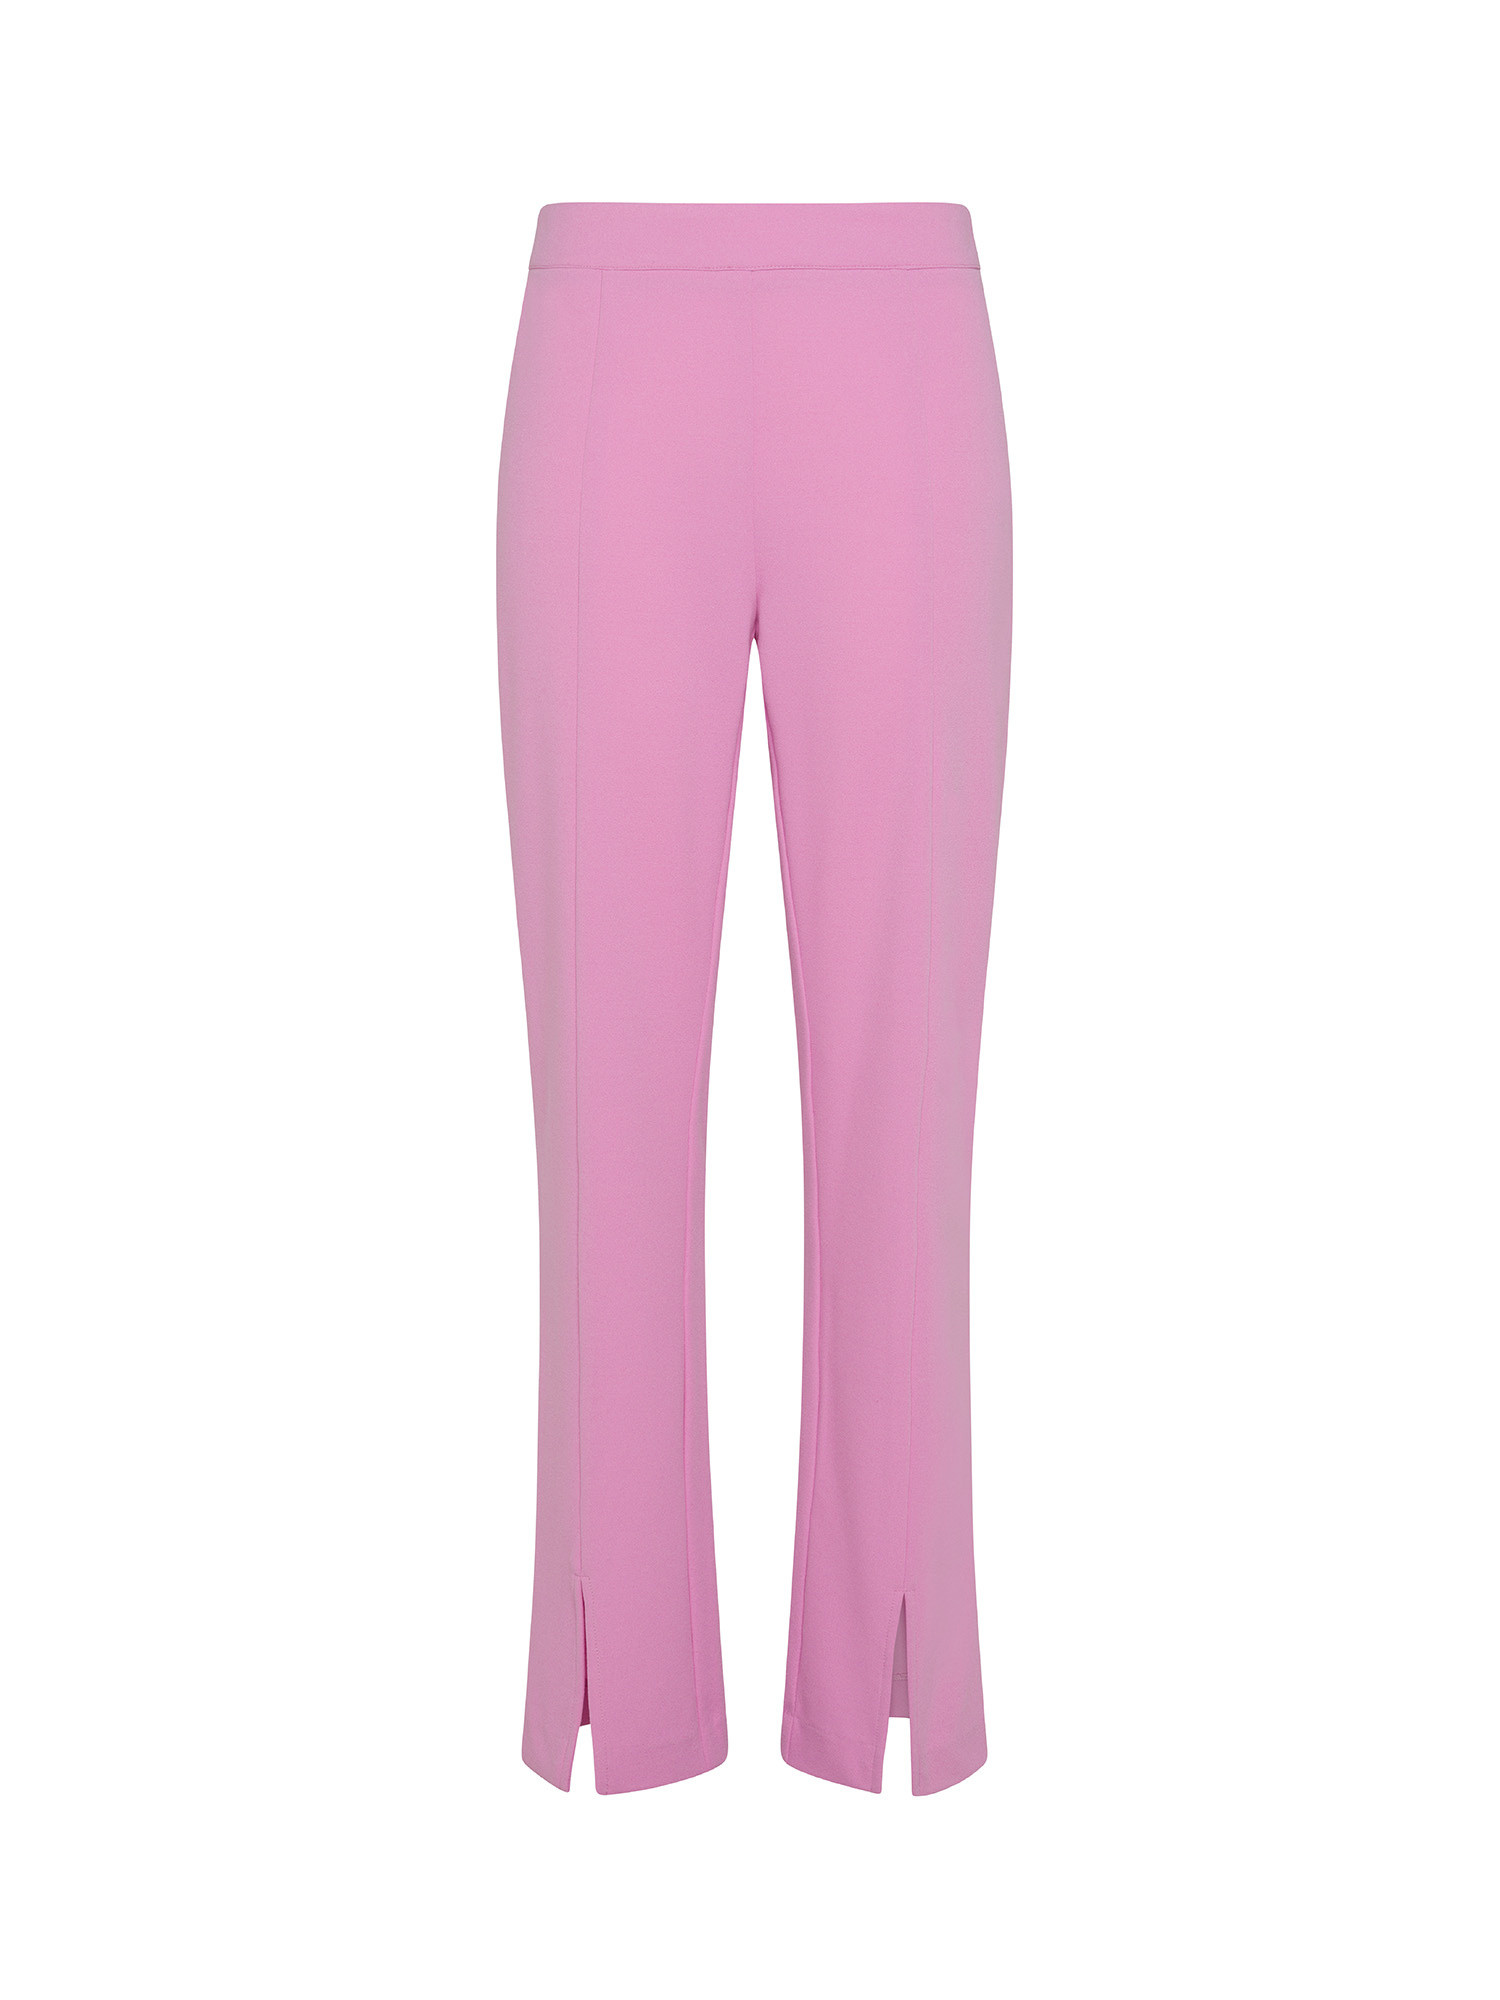 Koan - Crepe trousers with slits, Pink, large image number 0